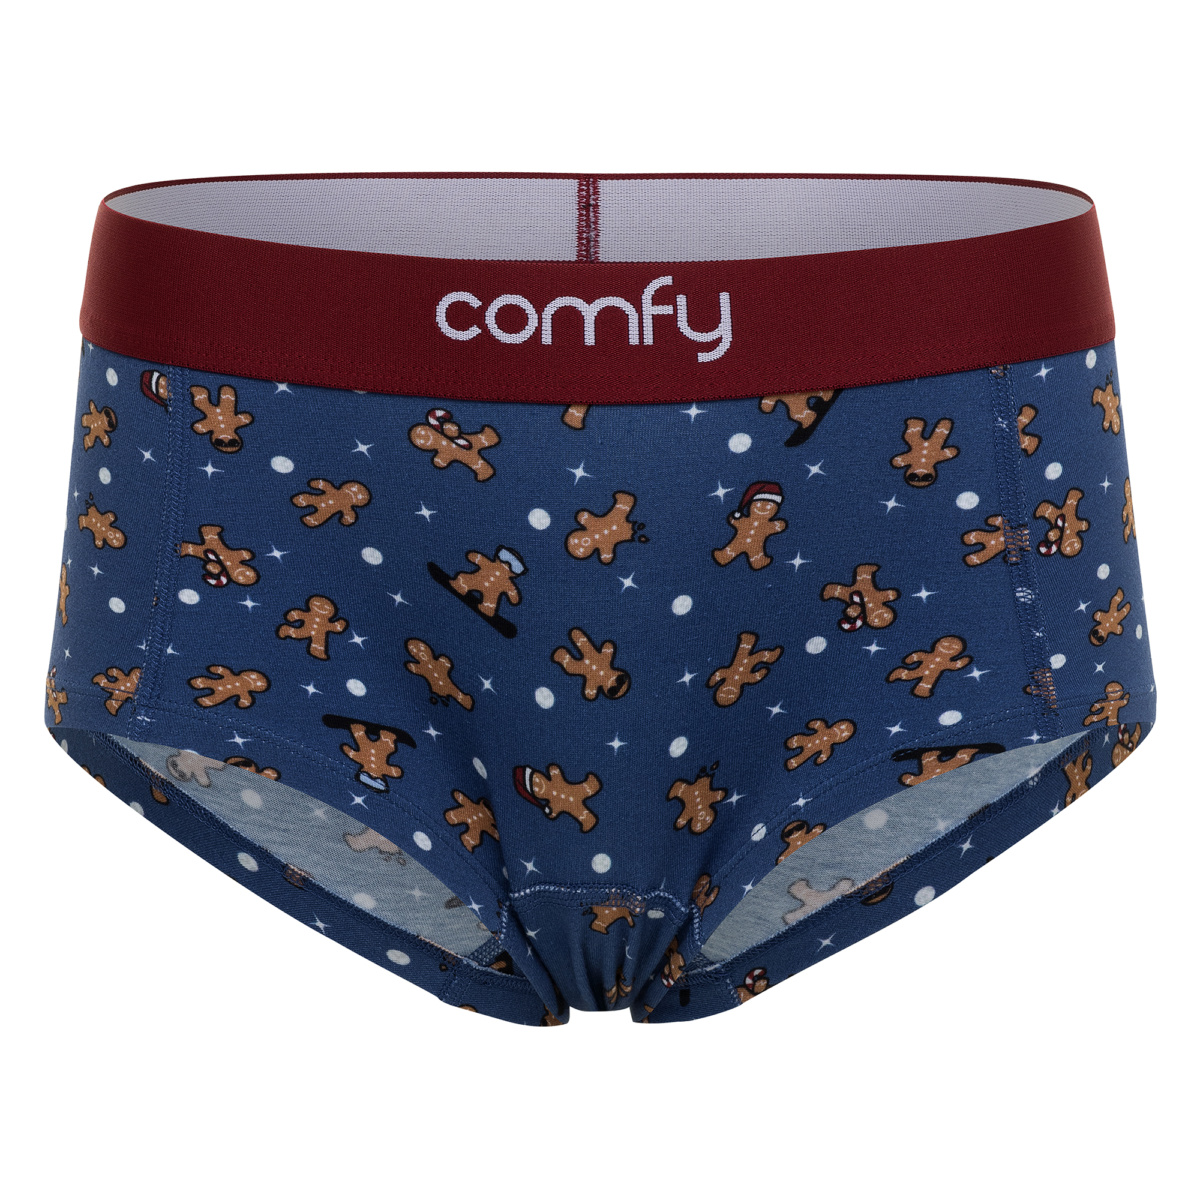 Comfy Underwear was conceived and designed in Norway.